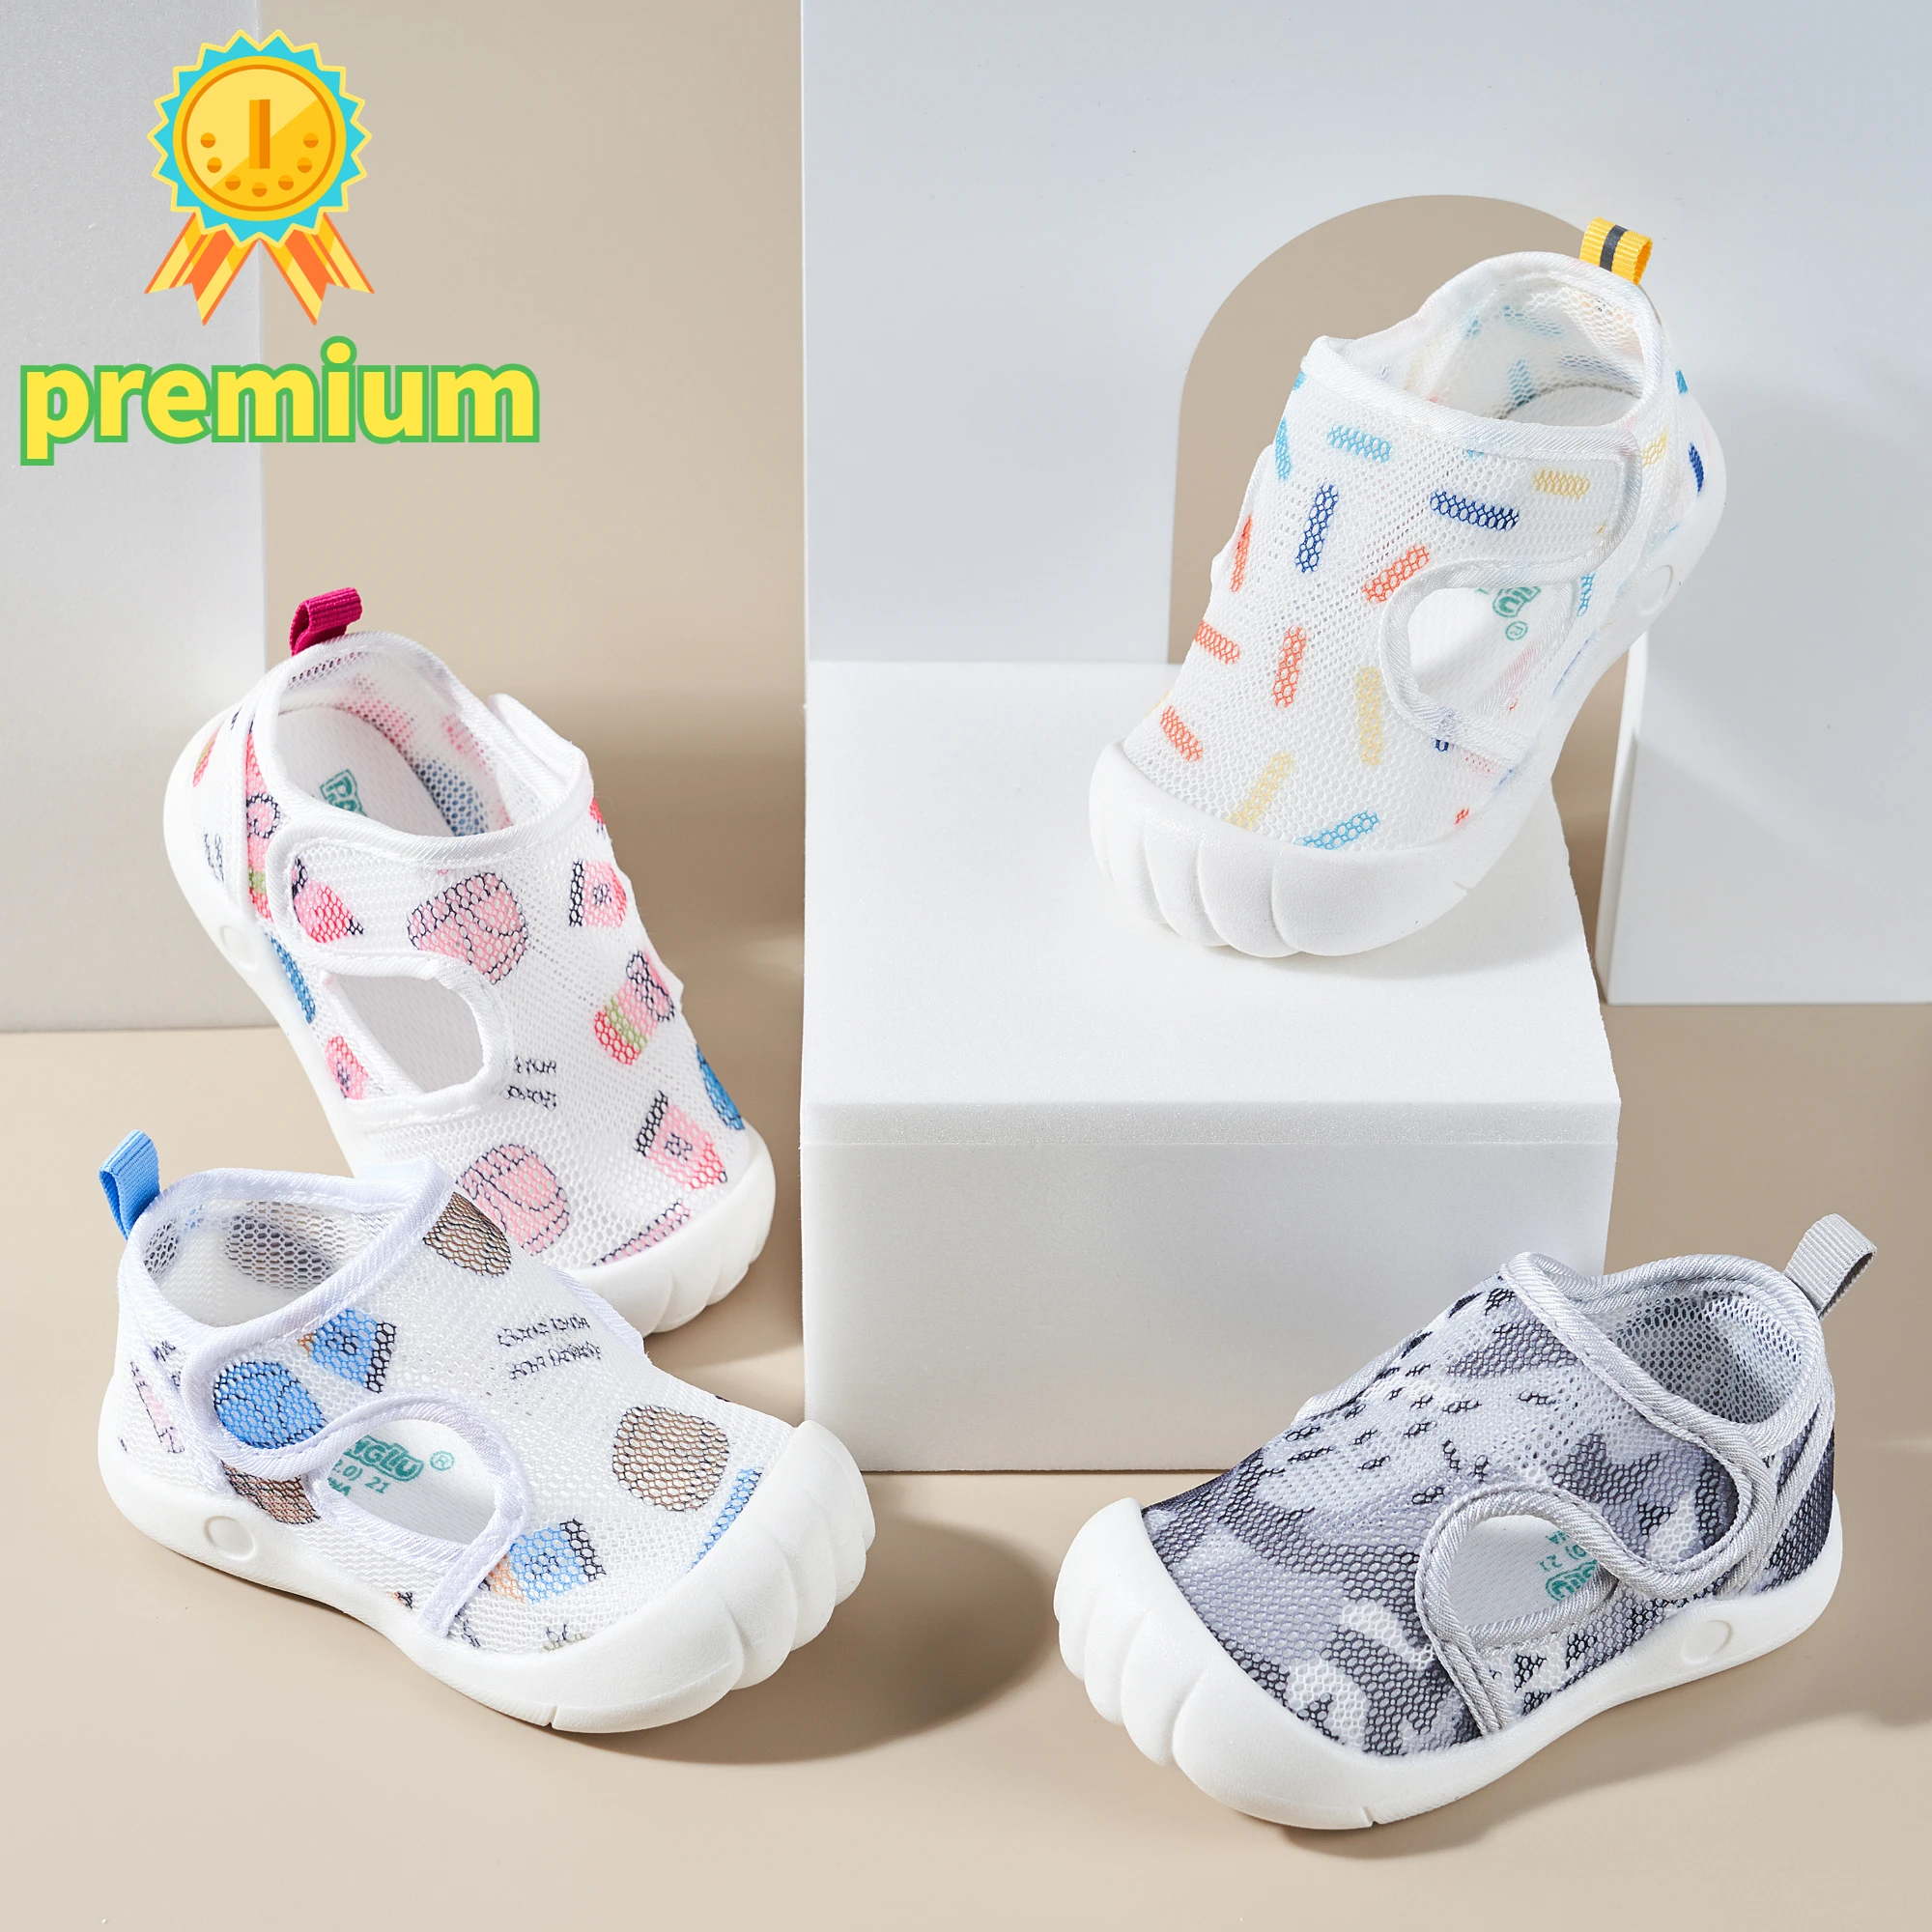 New Toddler Baby Sandals Breathable Air Mesh Cute Shoes 1-4 Years Anti-slip Soft Sole First Walkers Infant Lightweight Summer